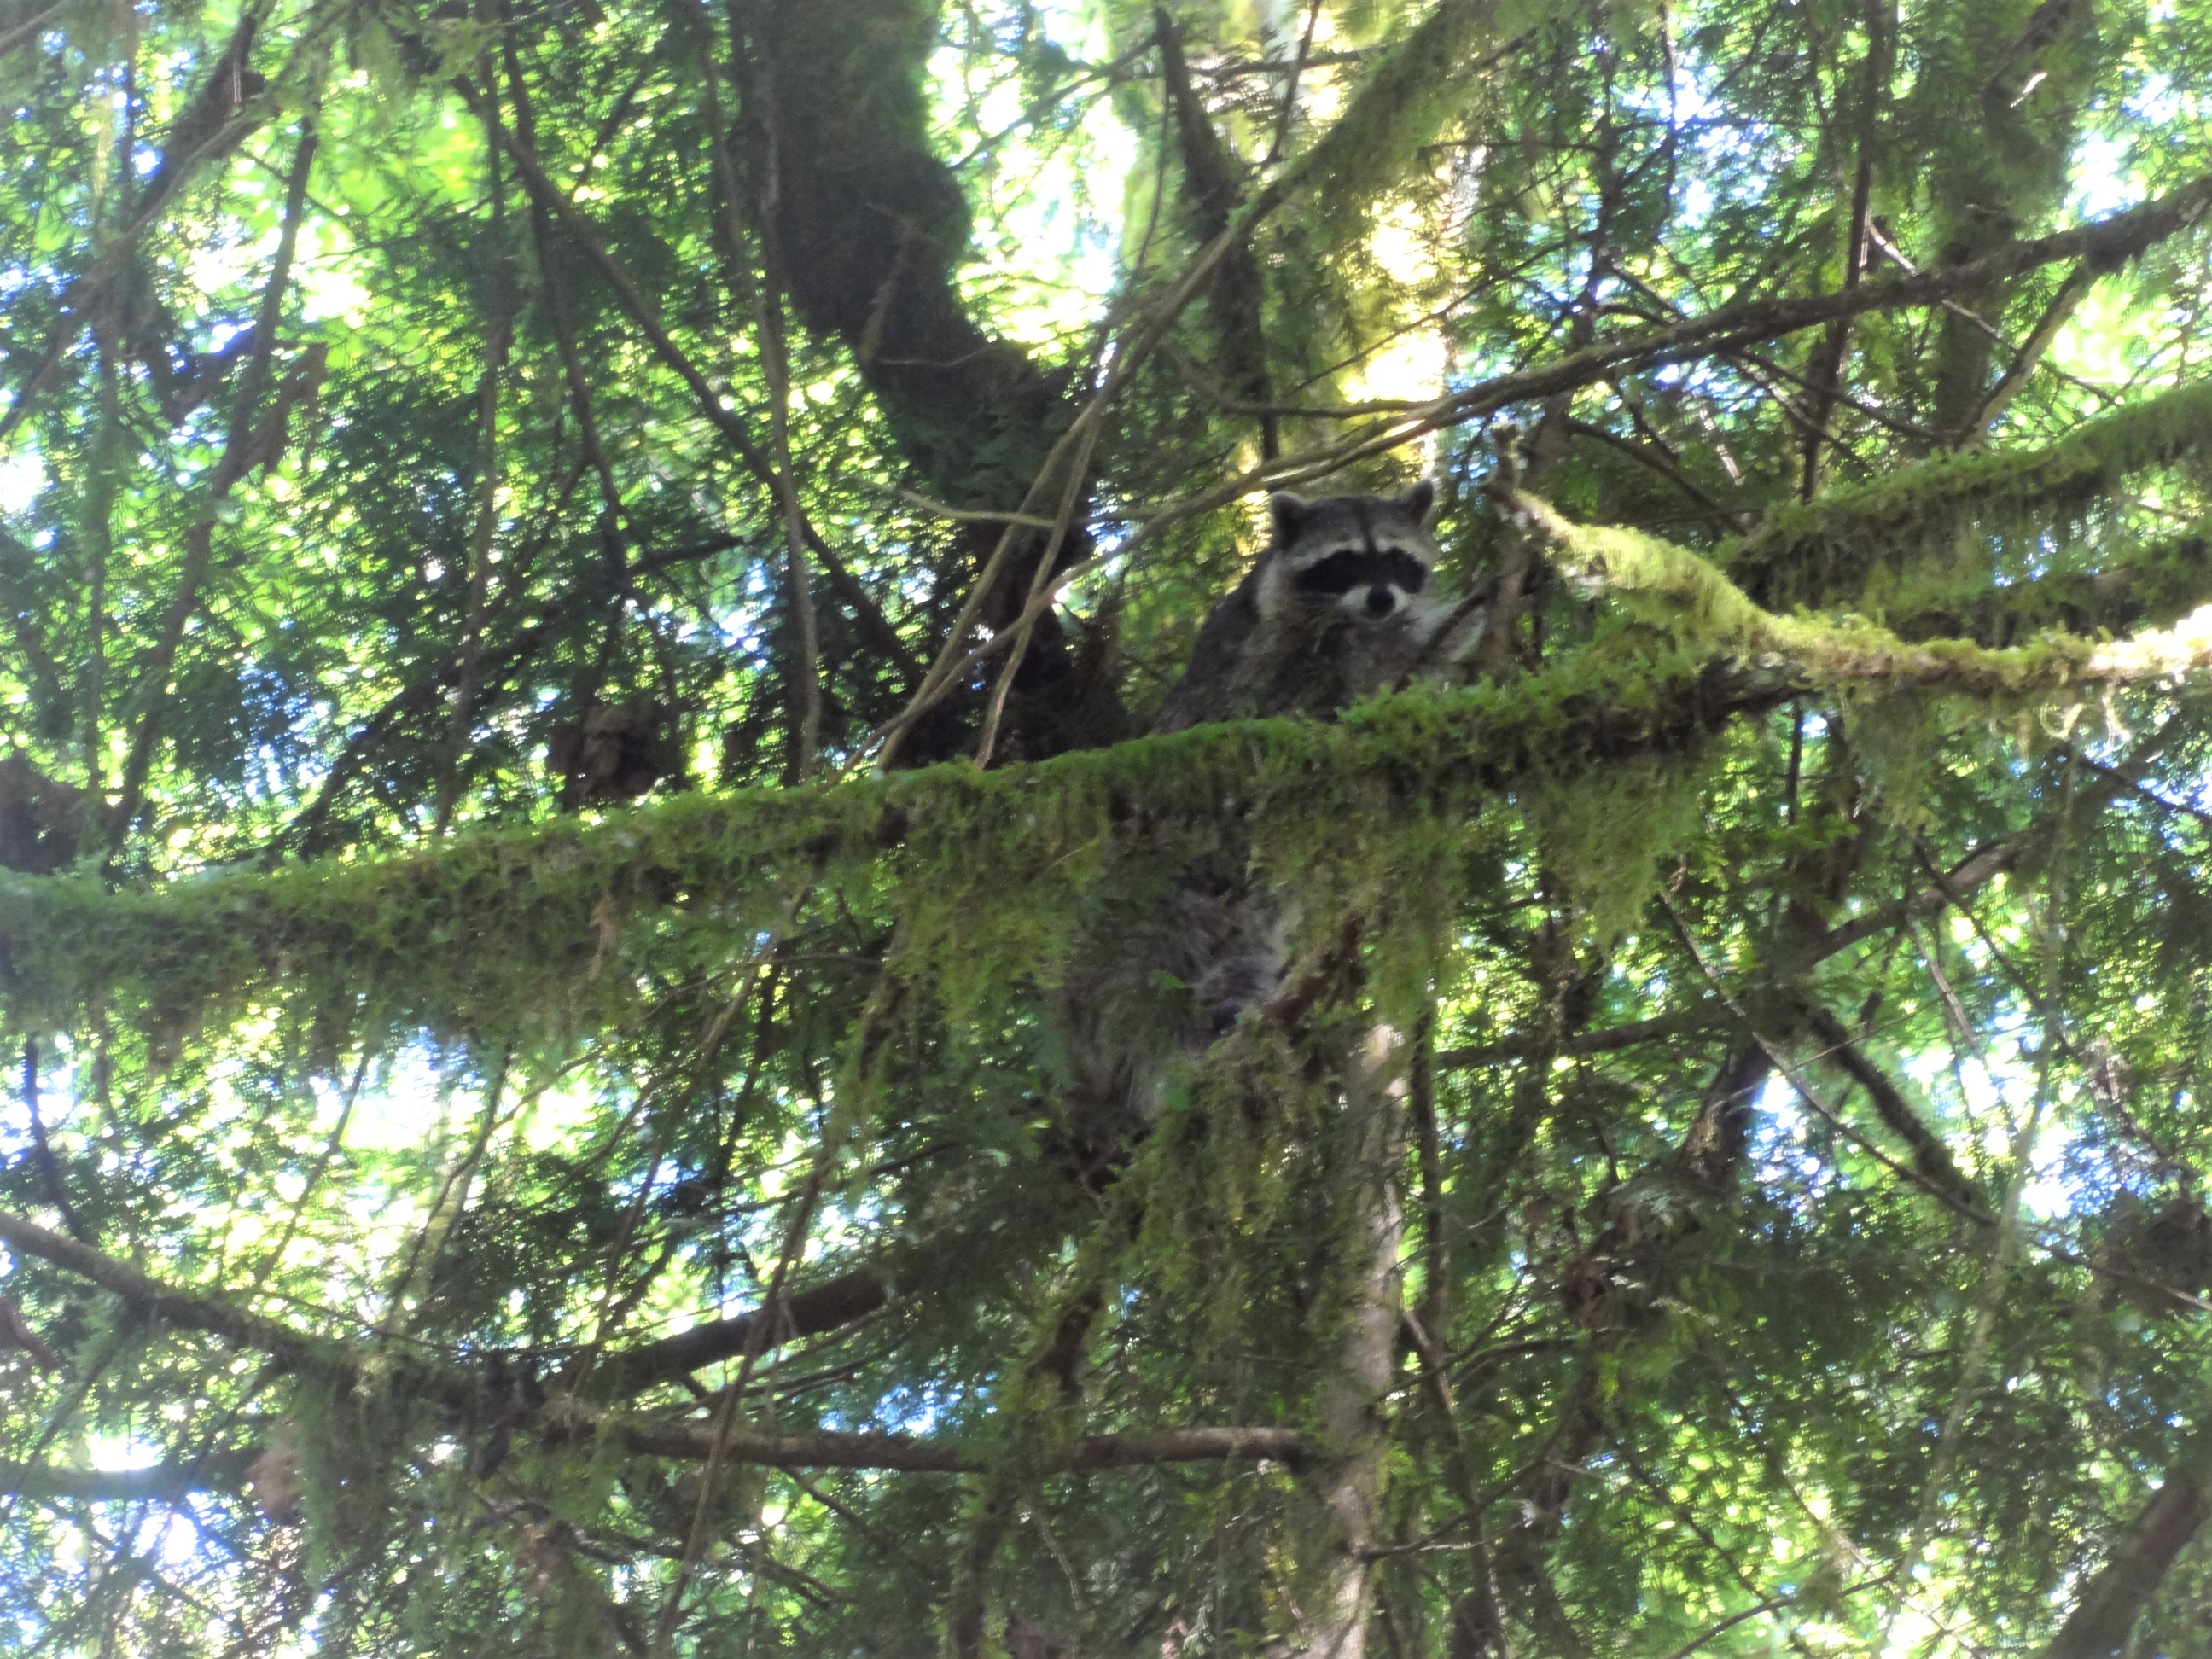 A raccoon peers through the branches at Jackman Creek Conservation Area. Photograph credit: Skagit Land Trust staff.